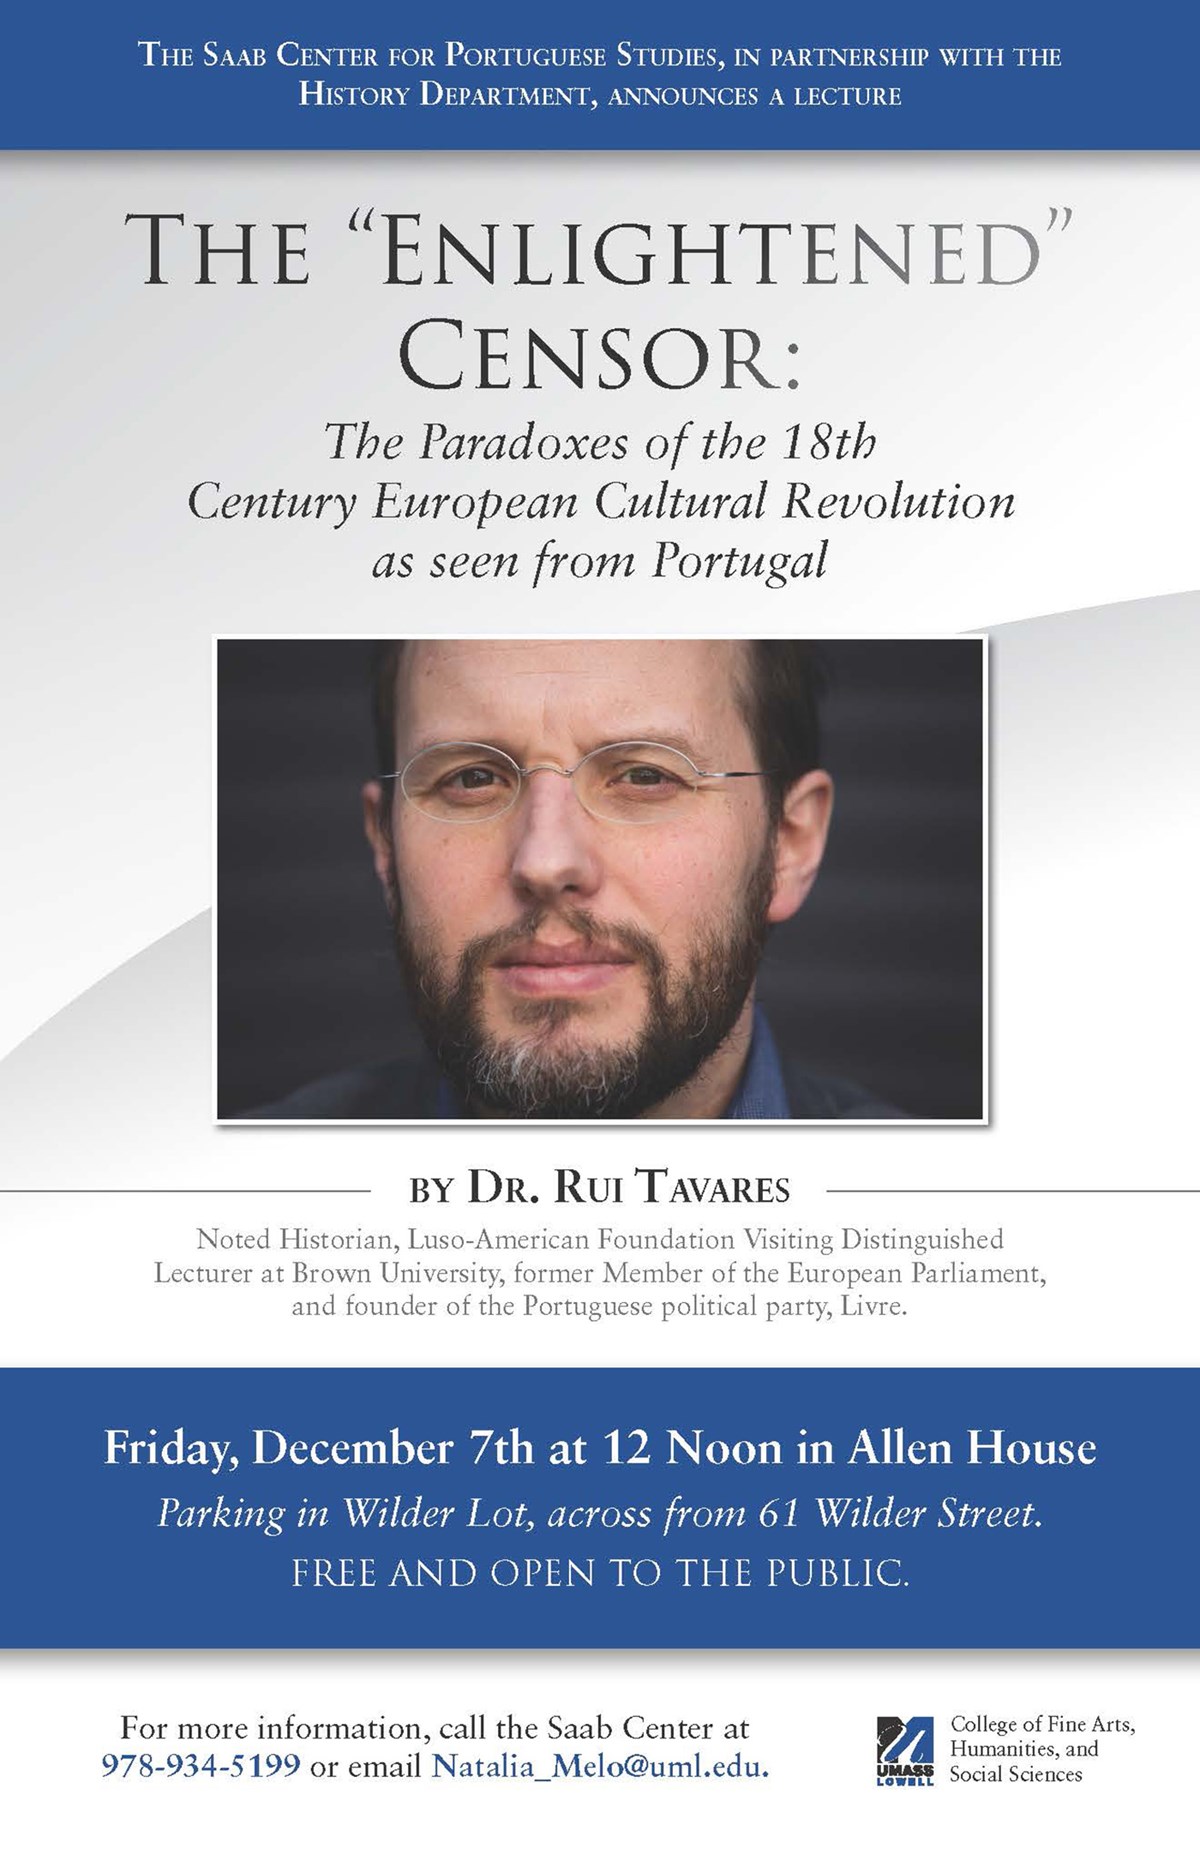 The Saab Center for Portuguese Studies, in partnership with the History Department, announces a lecture by Dr. Rui Tavares, noted historian and the Luso-American Foundation Visiting Distinguished Lecturer at Brown University in Fall 2018, titled “The ‘Enlightened’ Censor: The Paradoxes of the 18th-Century European Cultural Revolution as seen from Portugal,